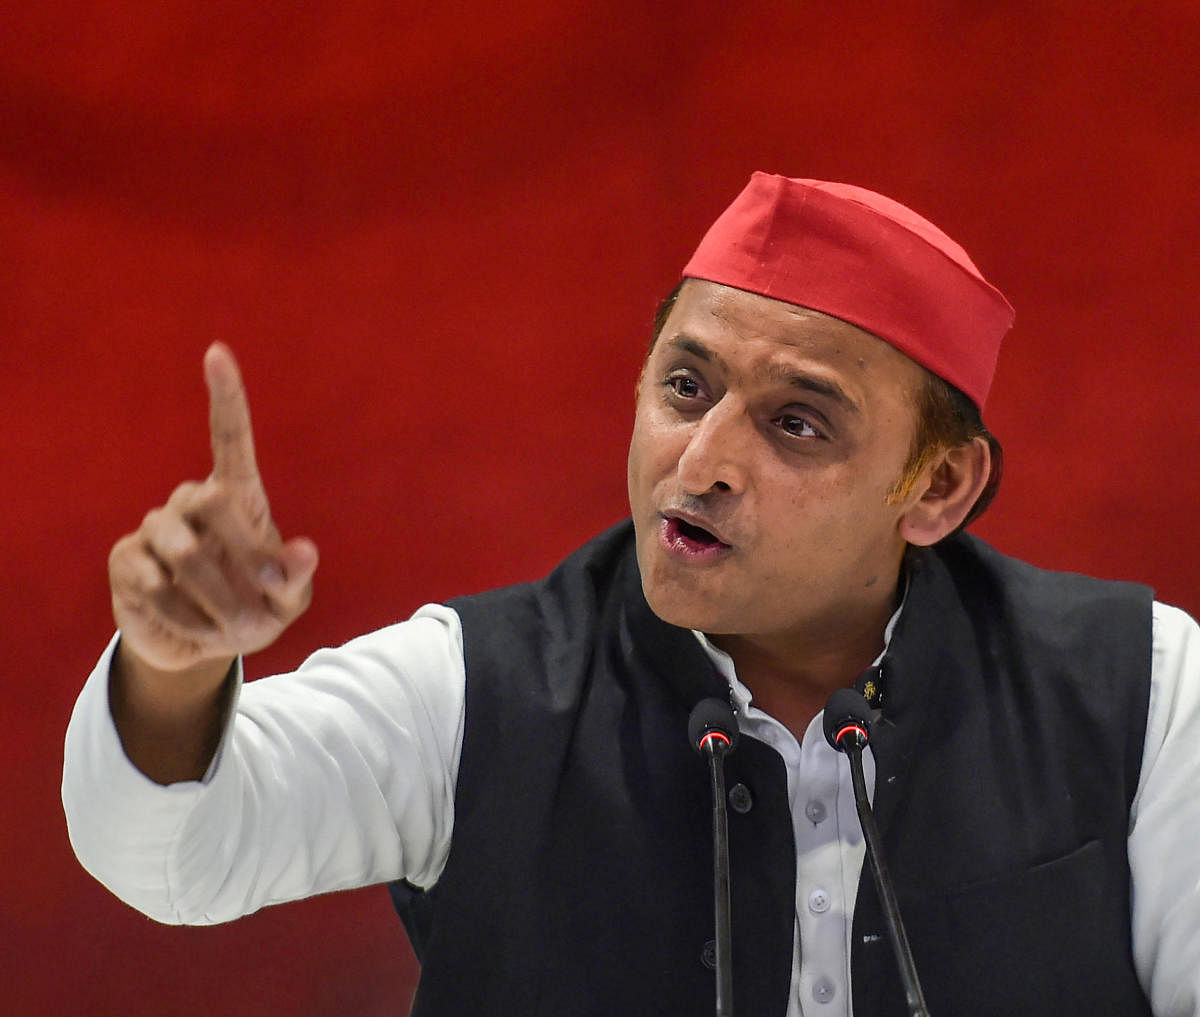 Samajwadi Party National President Akhilesh Yadav addresses a press conference at party office, in Lucknow, Tuesday, Feb. 18, 2020. (PTI Photo)